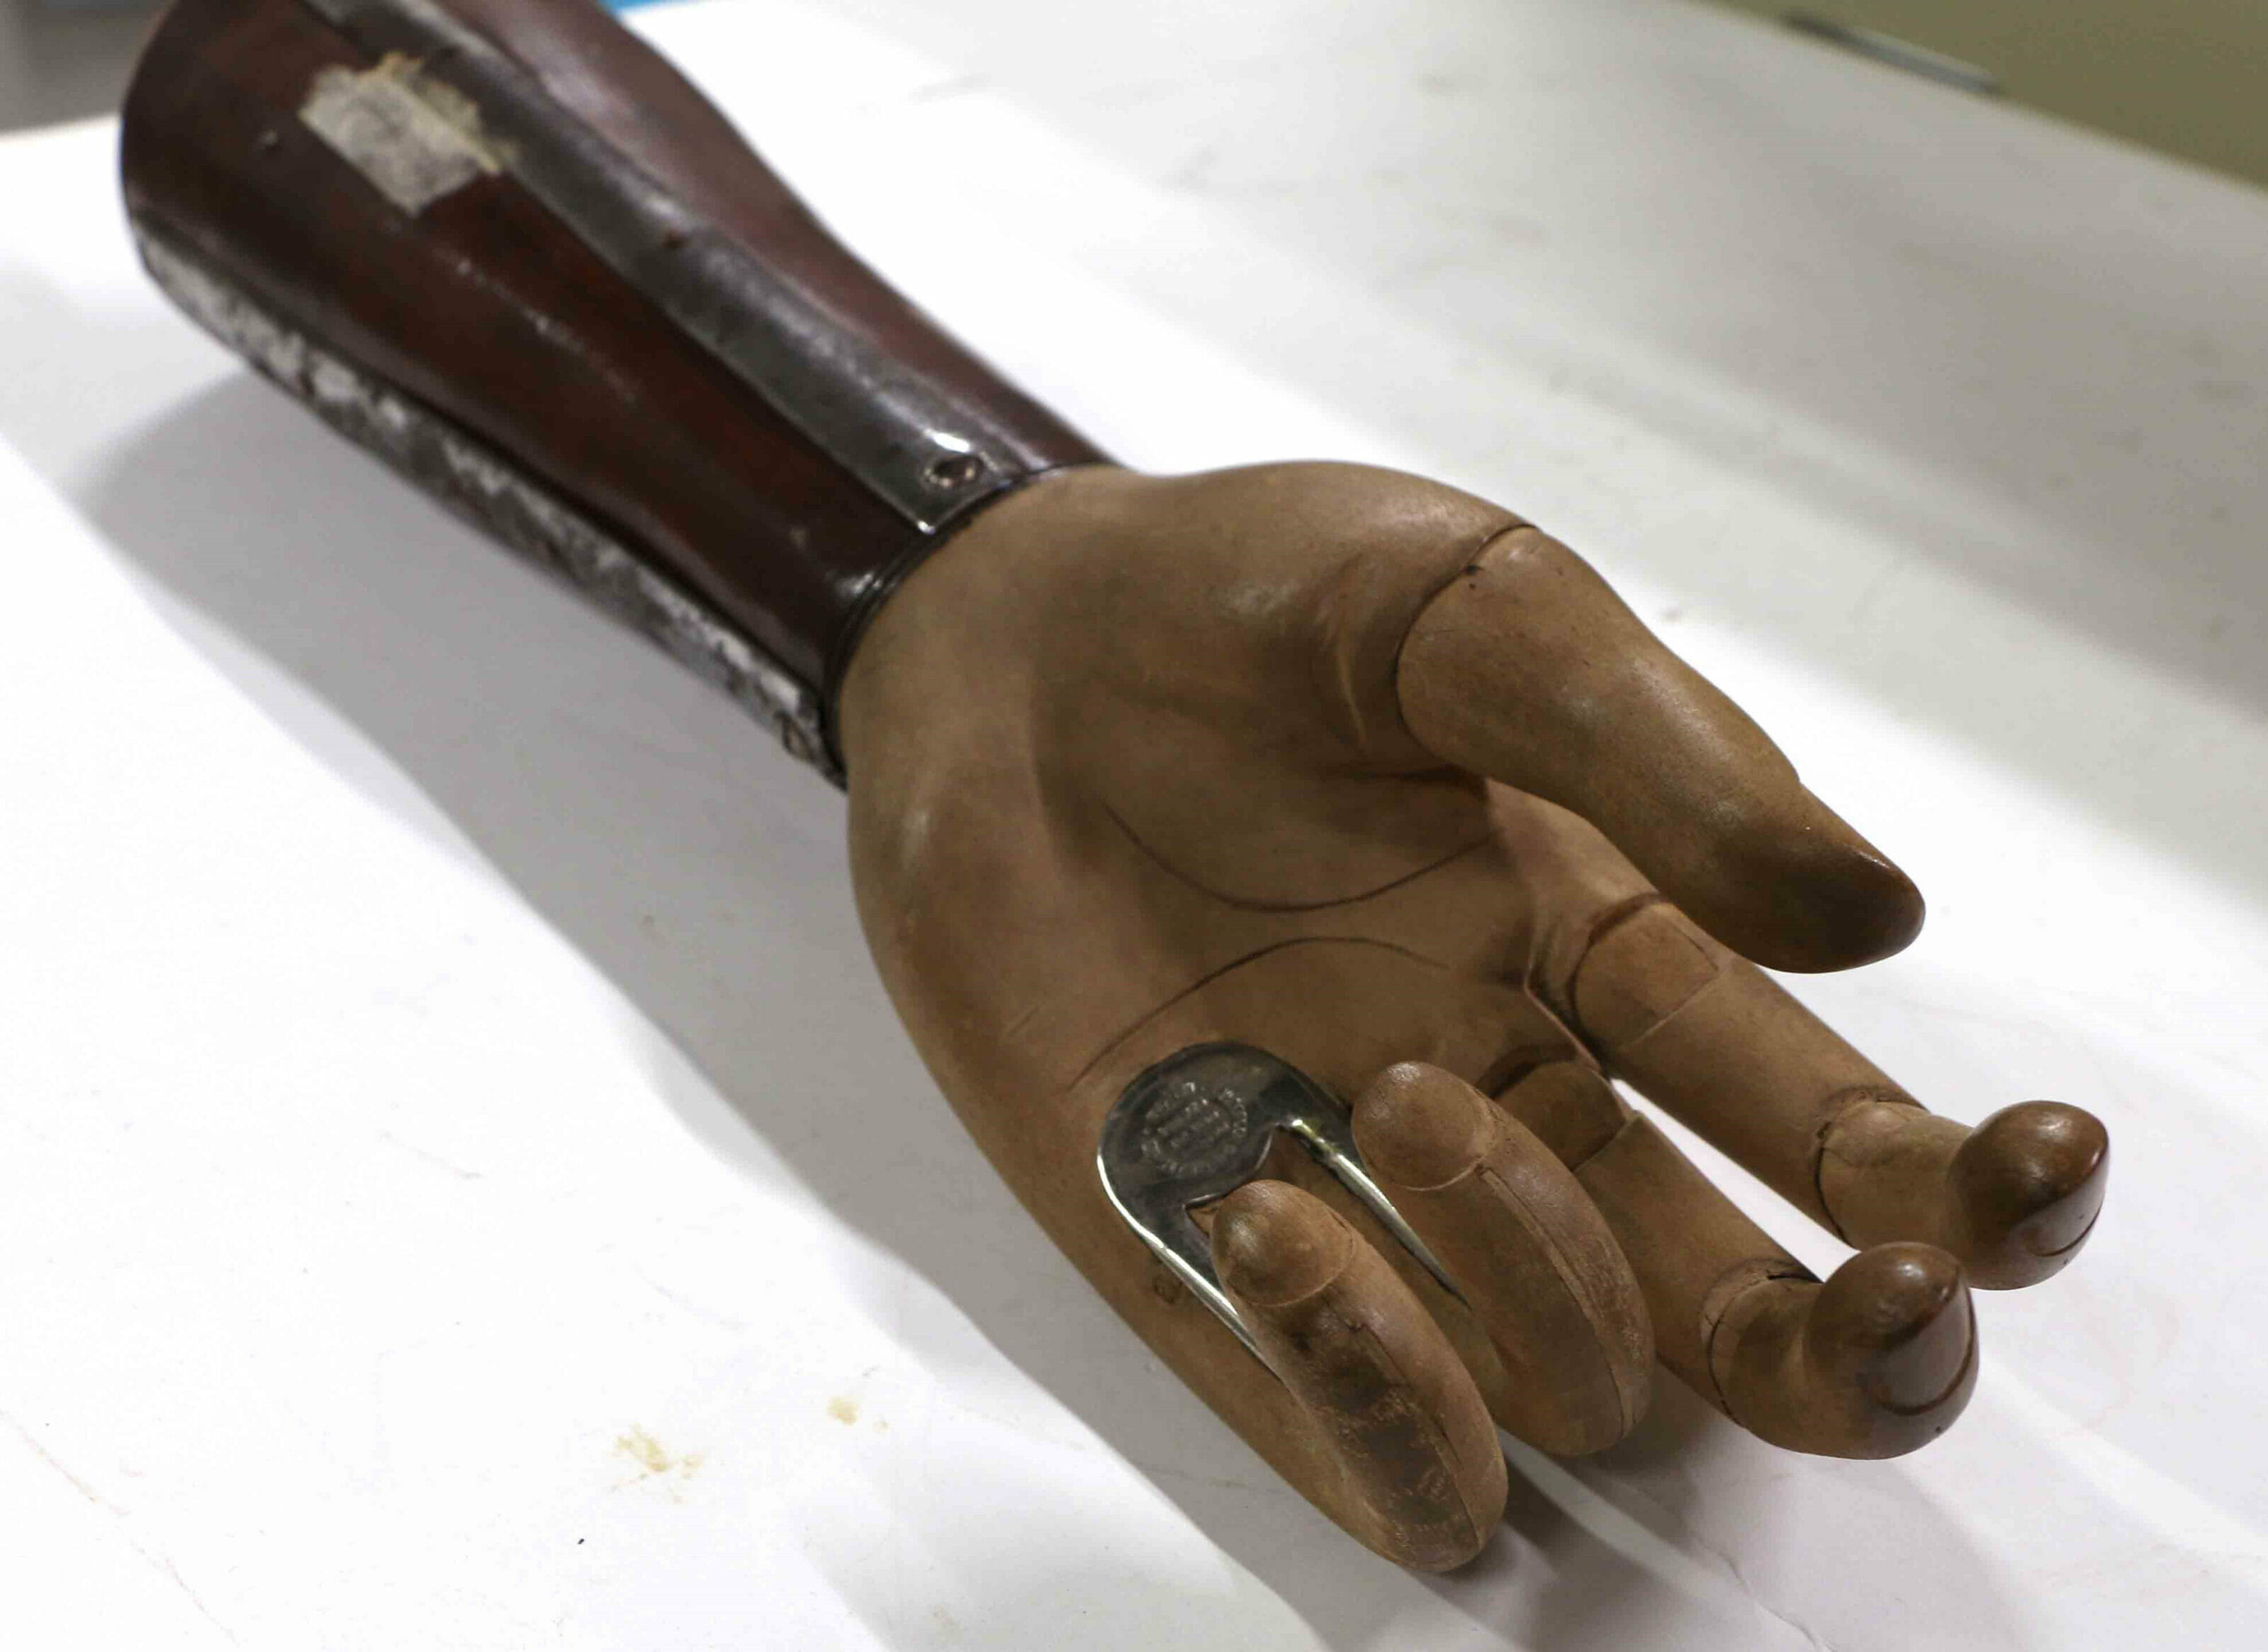 Openshaw wooden artificial hand. Designed by Thomas Openshaw, a surgeon at Queen Mary's Hospital, Roehampton, during World War I. A special feature of the hand is that the the ring and little fingers are held rigid, in a slightly flexed position, with steel reinforcement which extends into the palm. This allows bags and other objects to be carried. The thumb, index and middle fingers have a certain degree of articulation. Made by Anderson & Whitelaw, England c.1919.